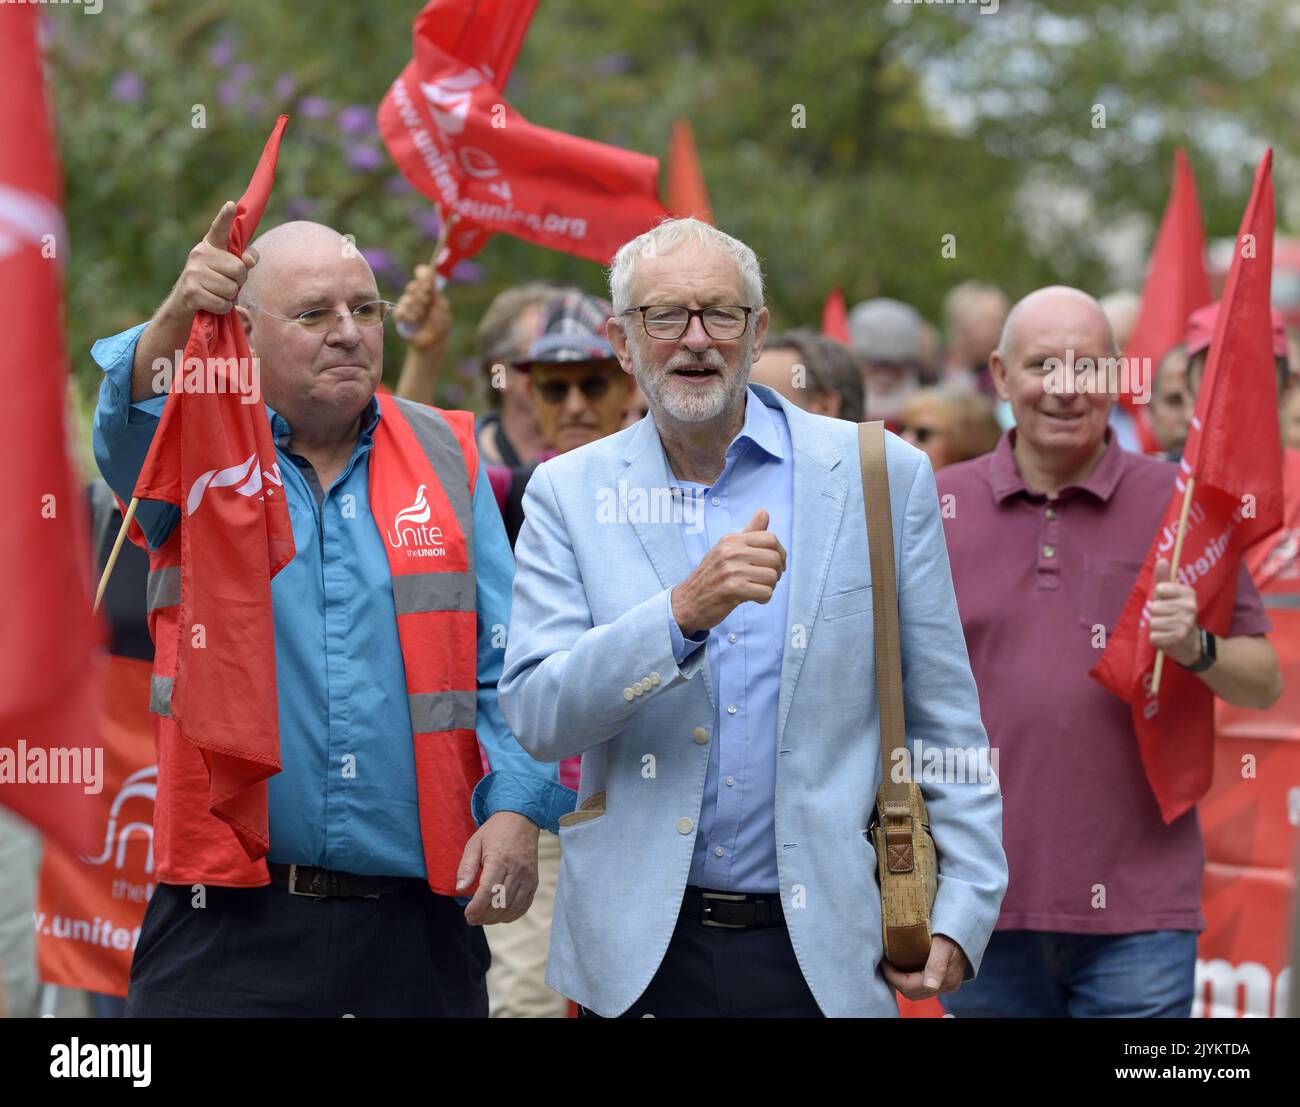 Jeremy Corbyn MP (Independent, former Labour leader) at a rally supporting striking London bus drivers, Westminster September 2022 Stock Photo